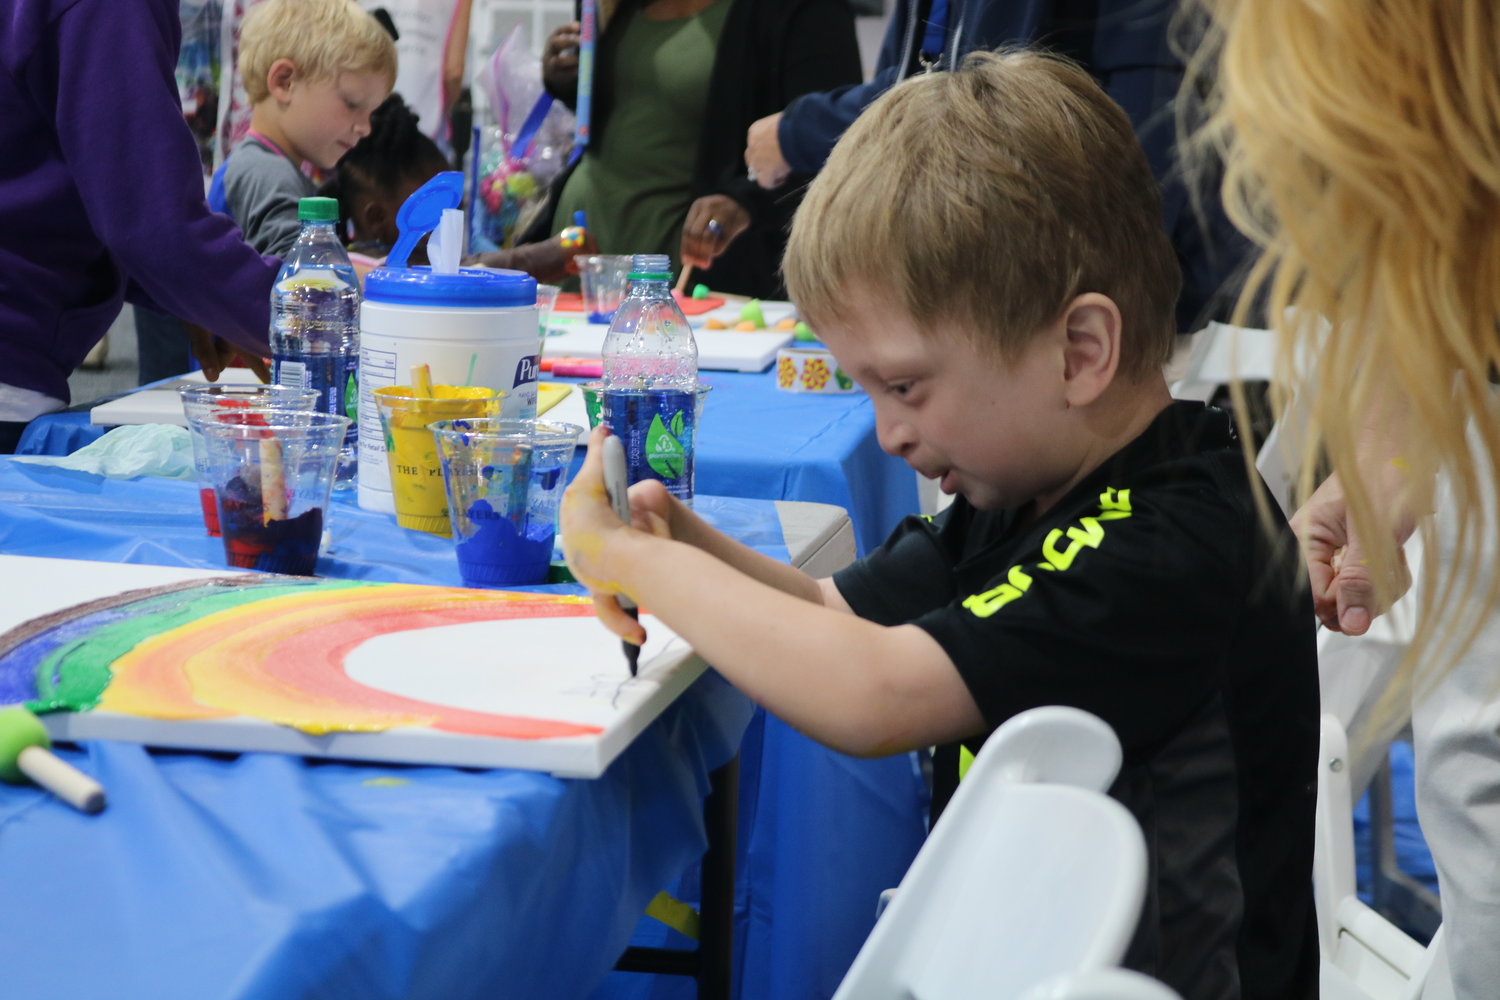 A kid at the event enjoys painting at an arts and crafts station.